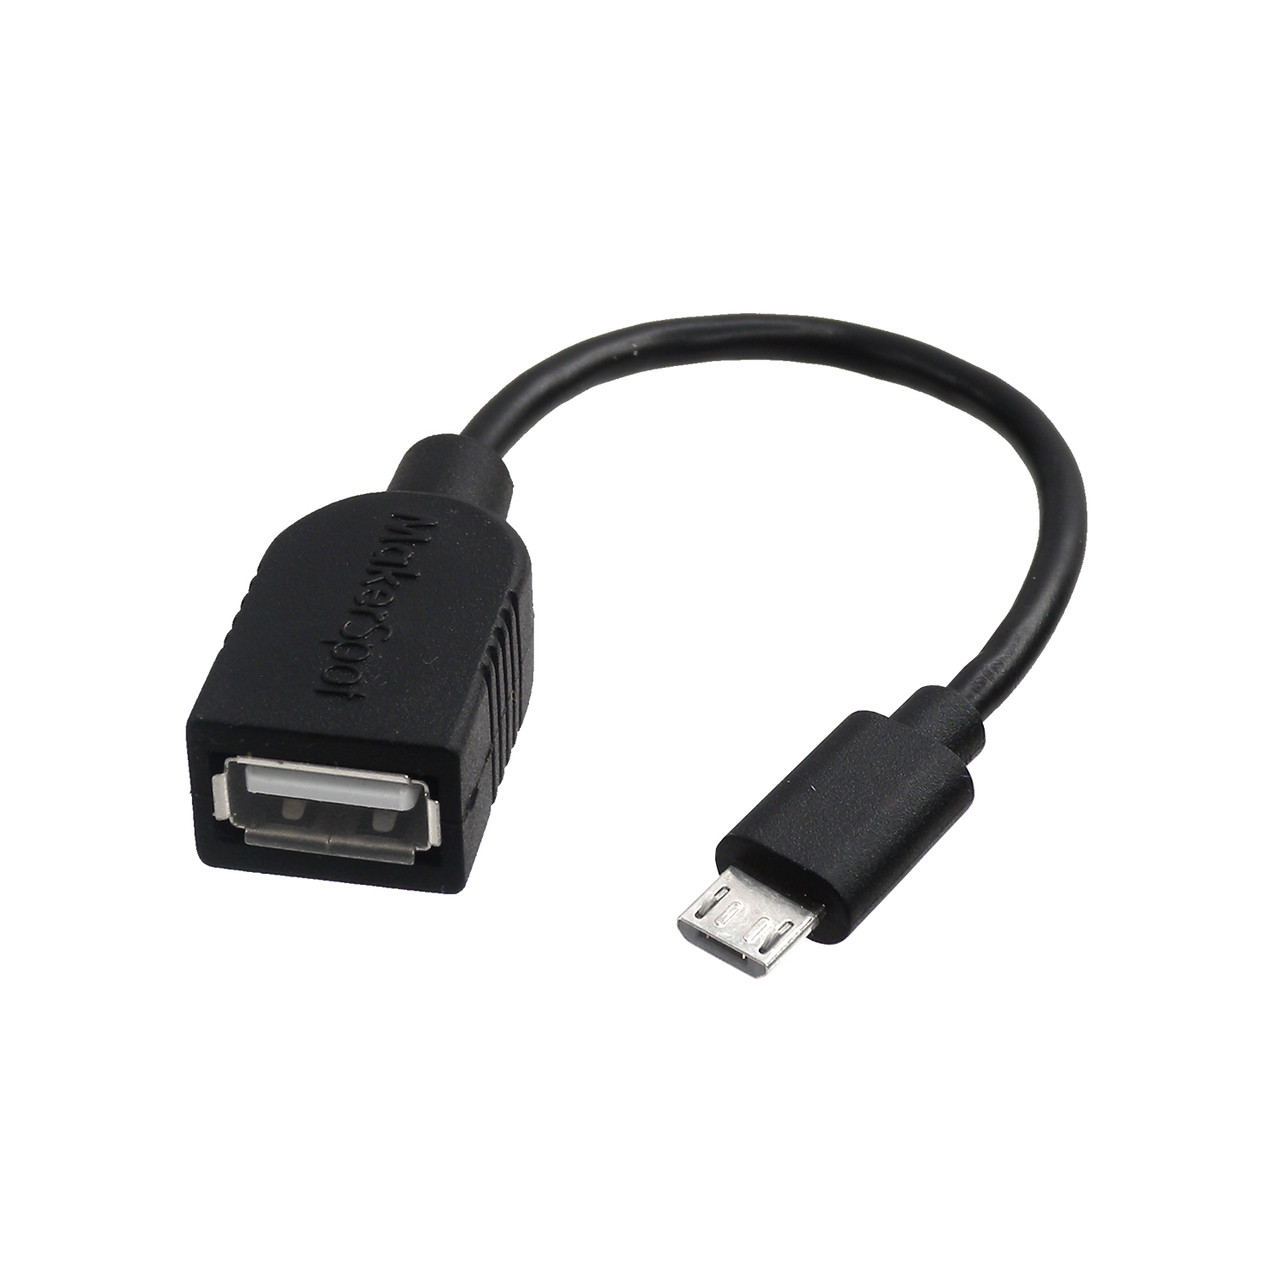 Black Micro USB to OTG Works with Micromax X352 Direct On-The-Go Connection Kit and Cable Adapter! 